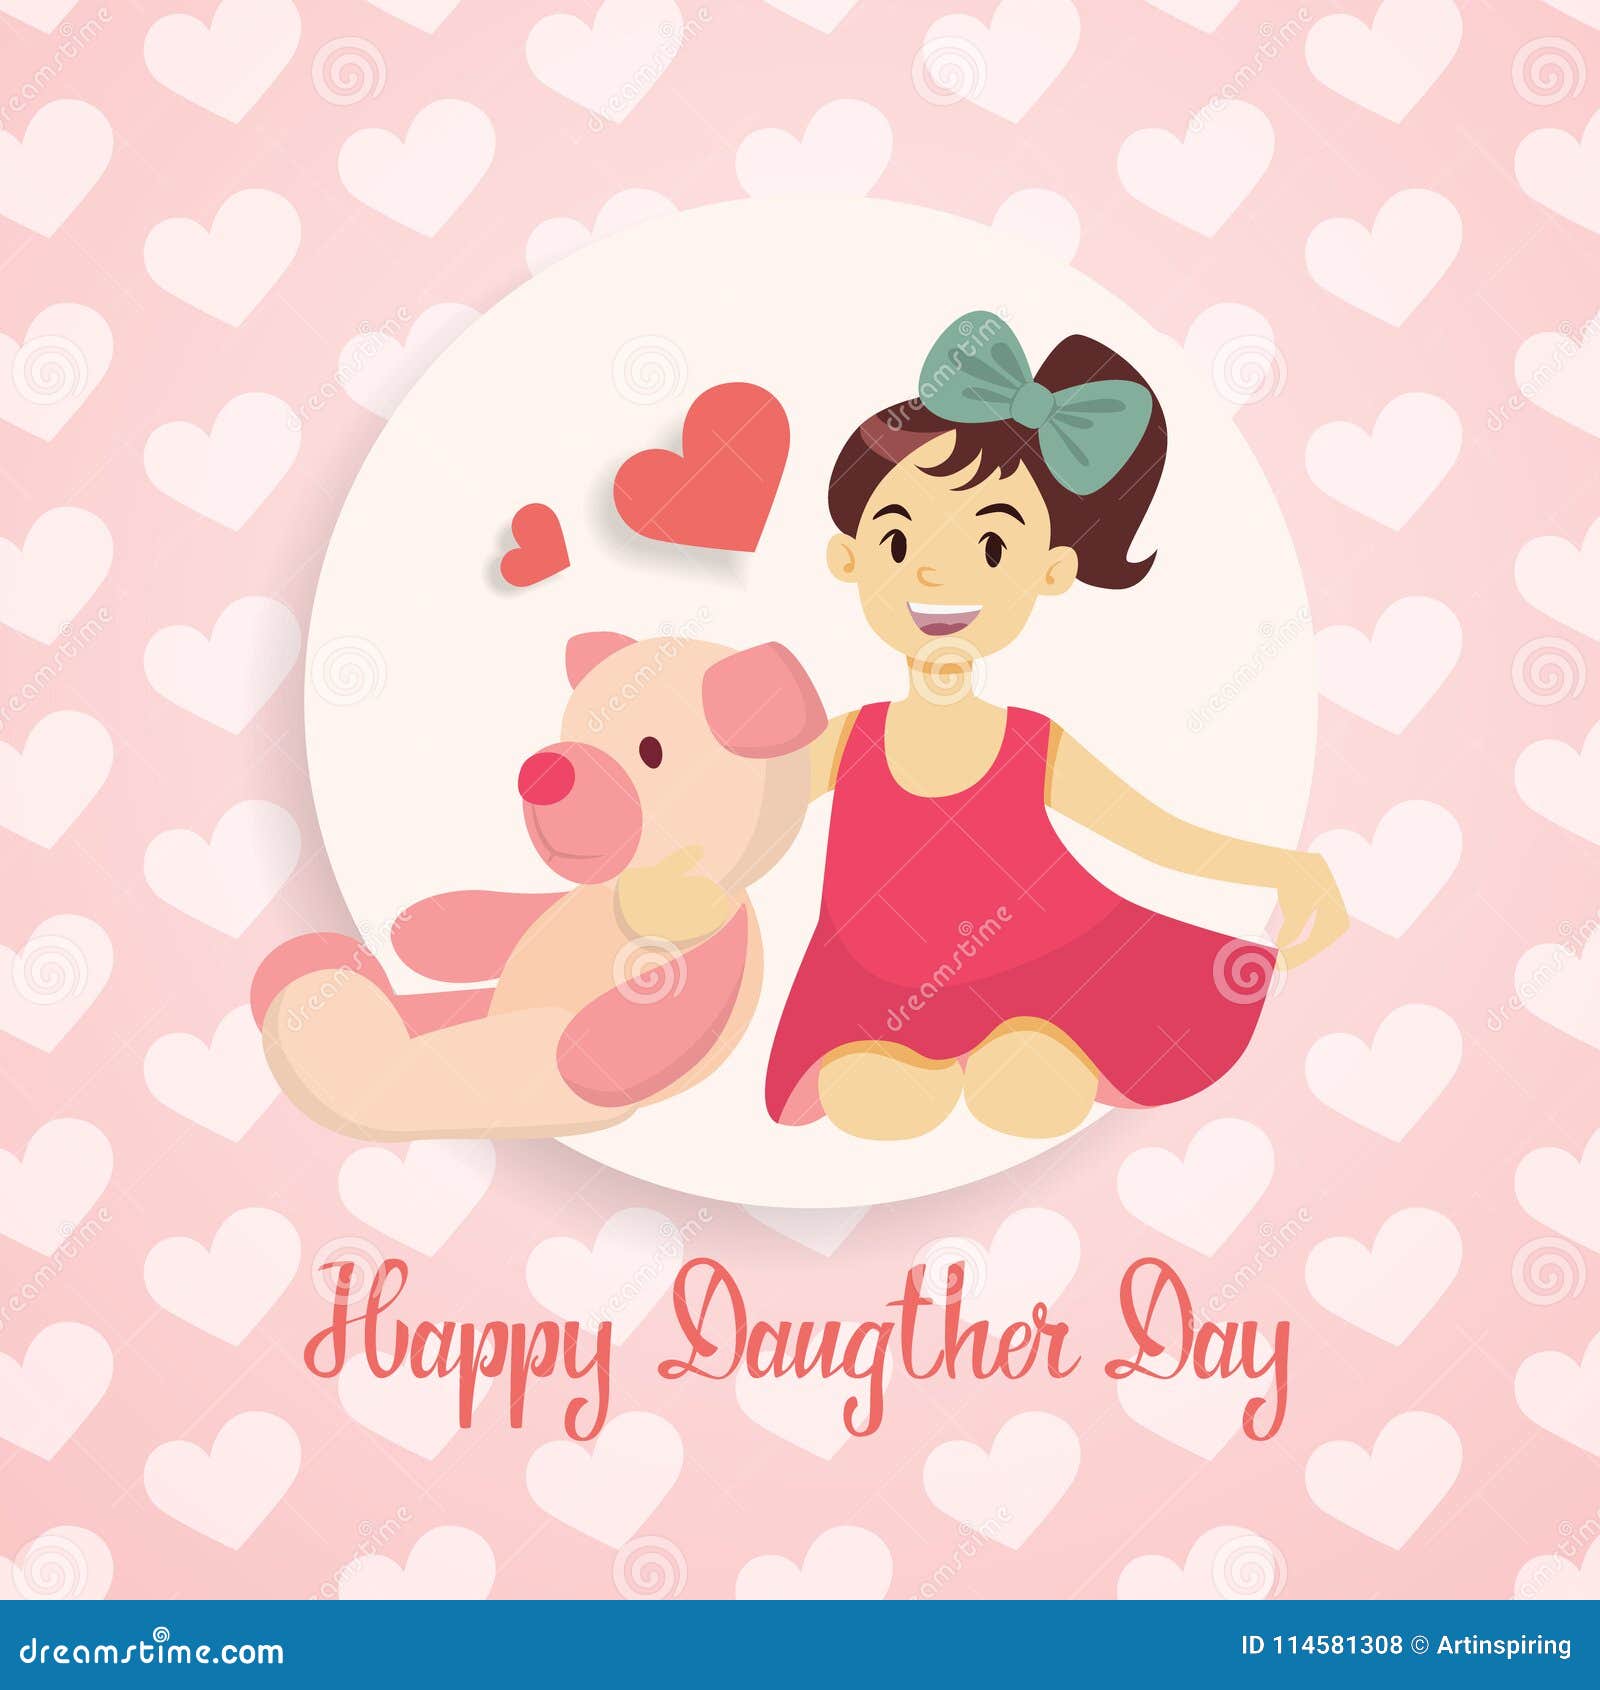 Happy daughters day. stock vector. Illustration of heart - 114581308